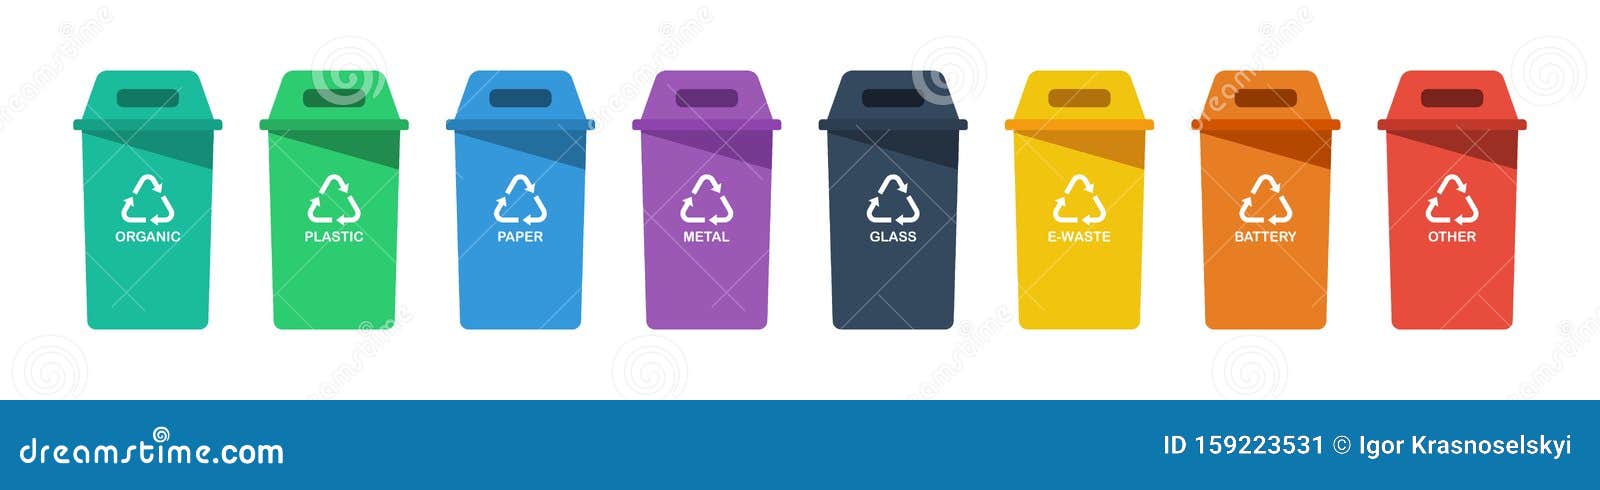 separation concept. set of color recycle bin icons in trendy flat style,  on white background. green blue violet black yel